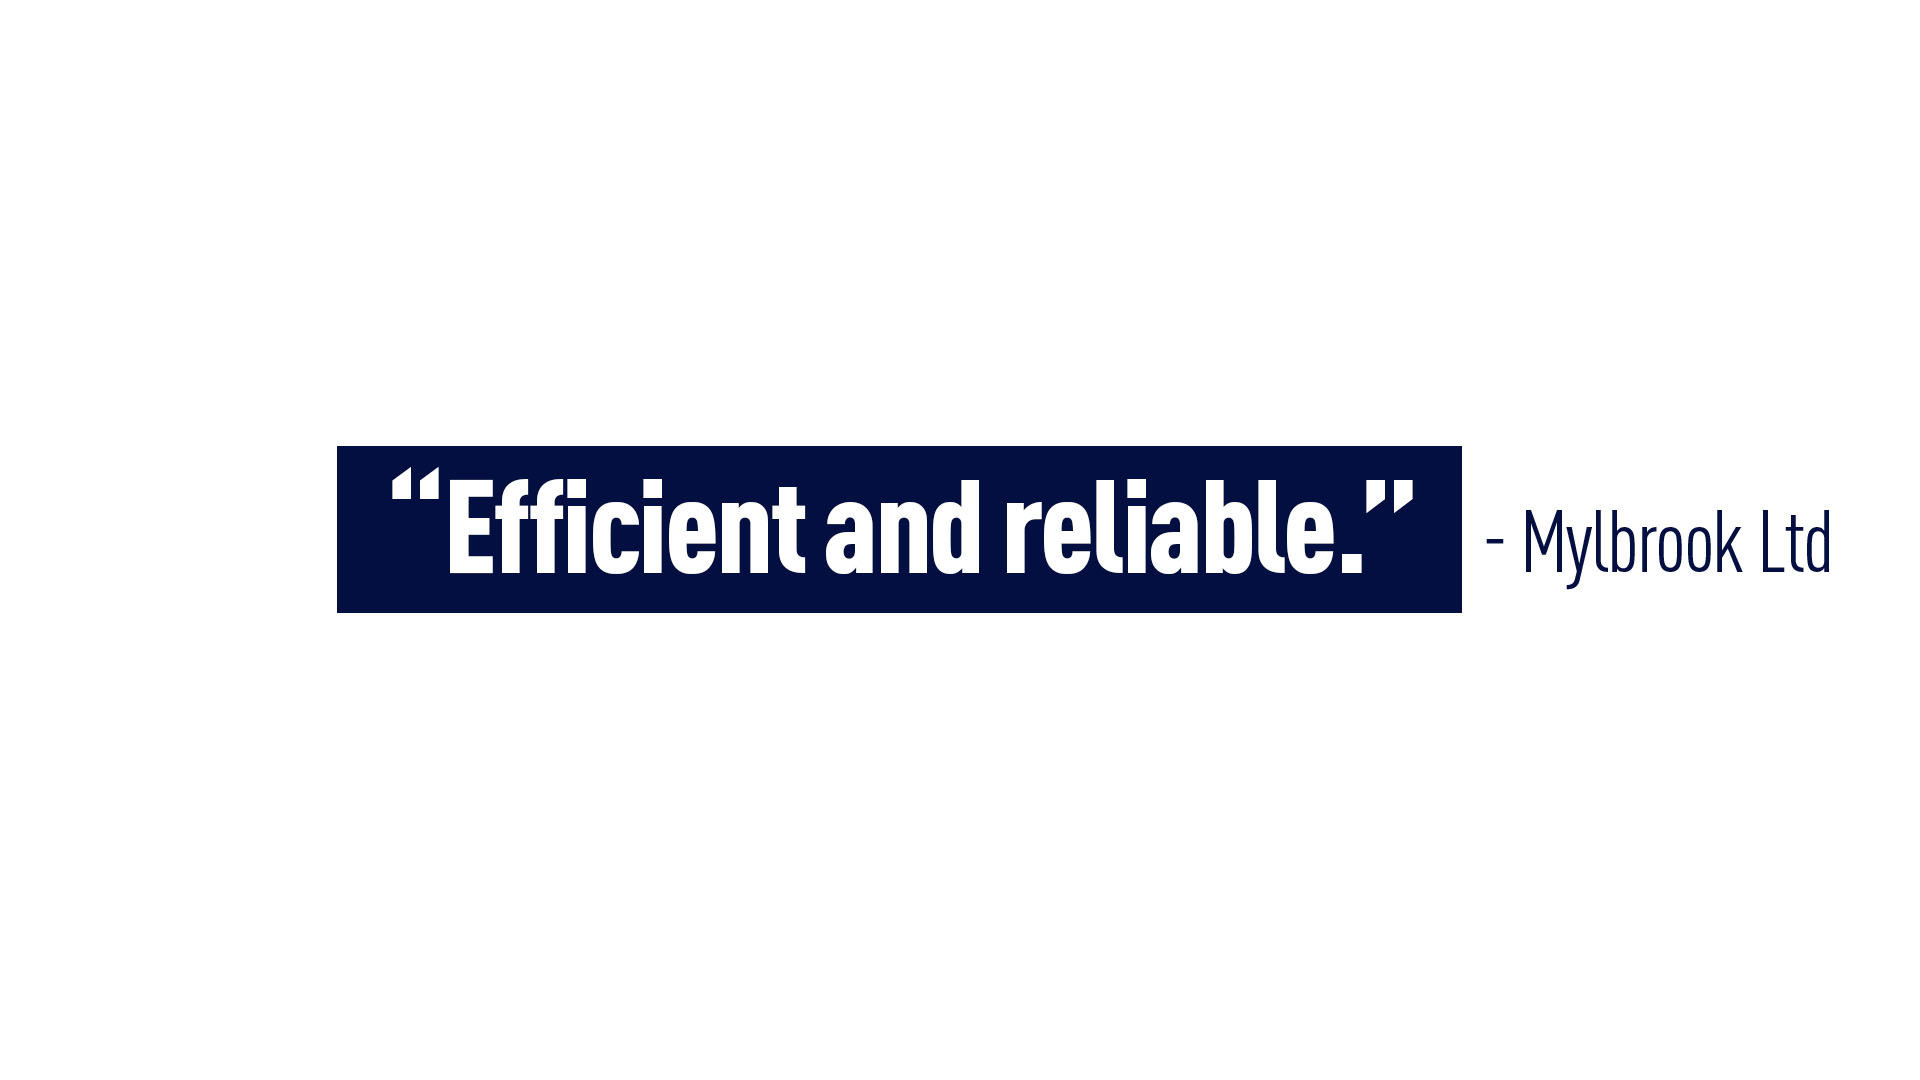 Mylbrook Ltd – “Efficient and reliable.”